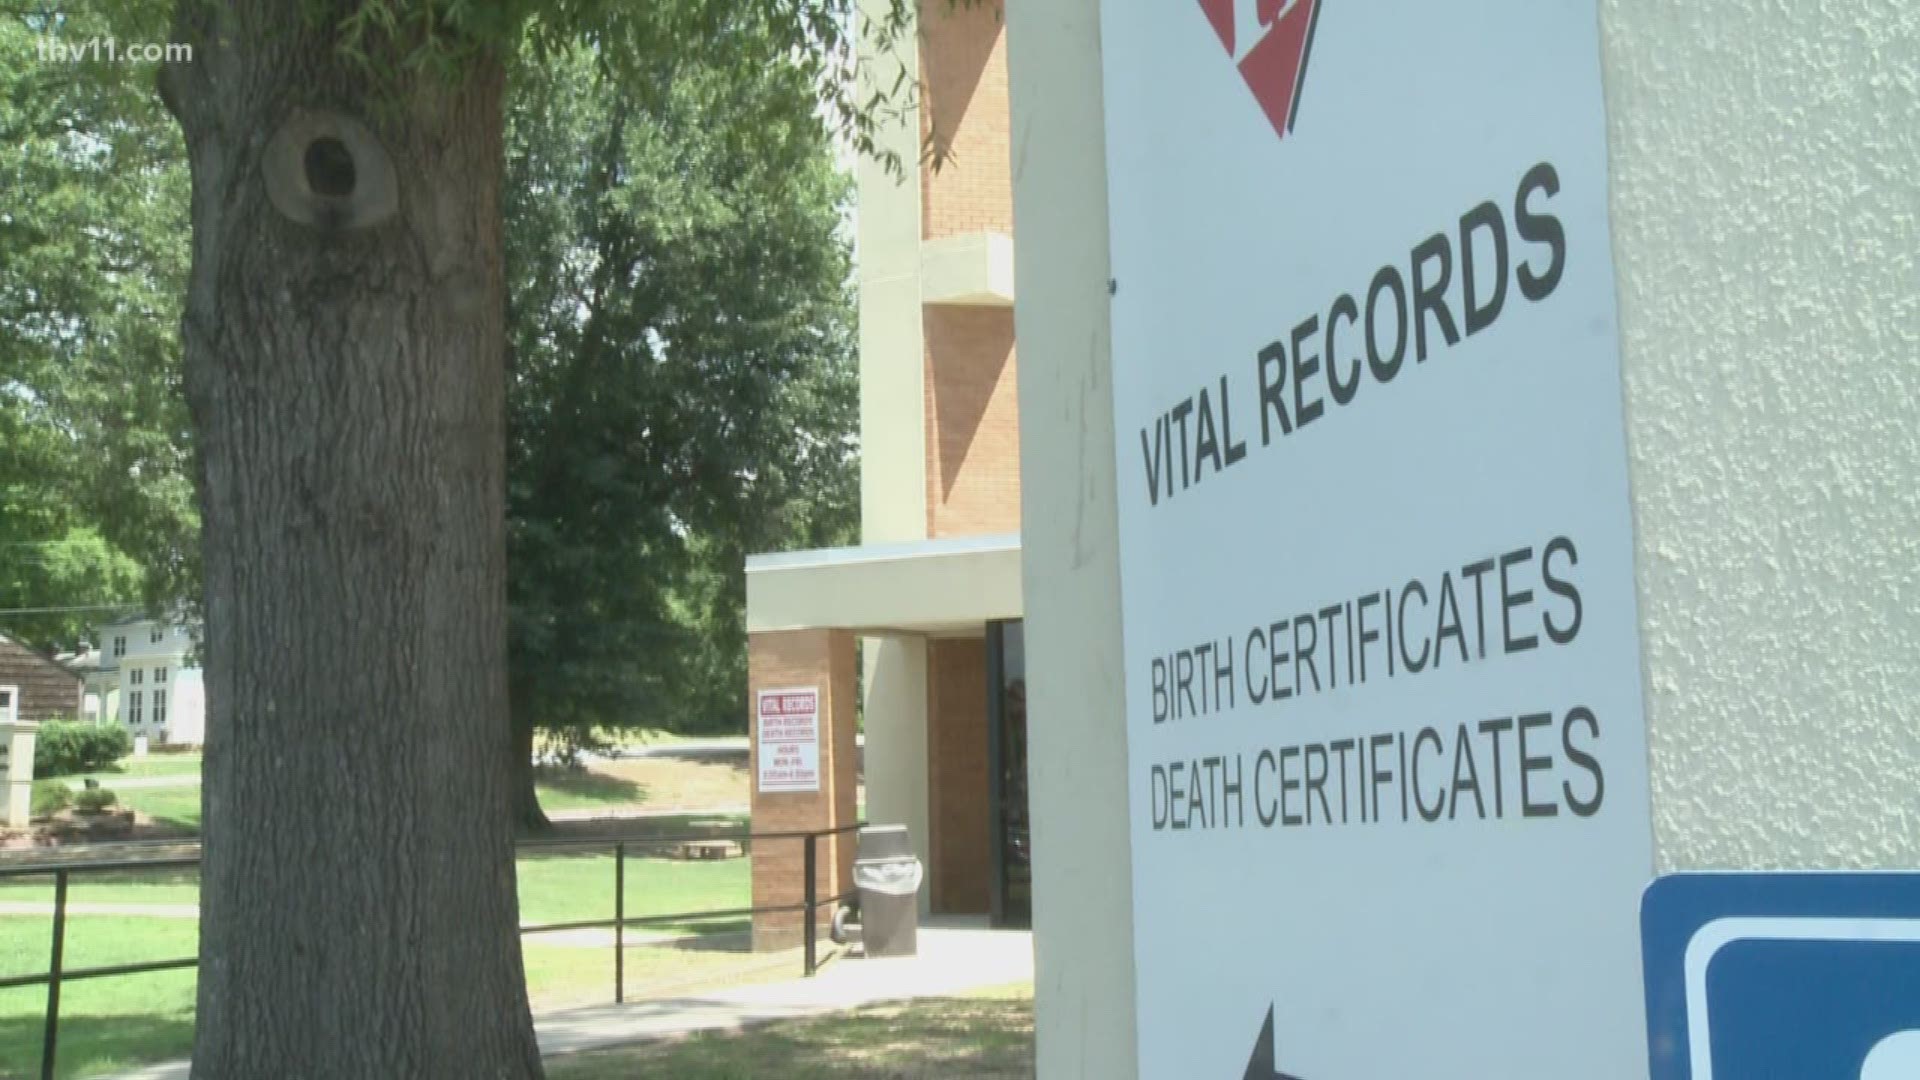 Starting today, people in Arkansas who were adopted can access their birth records.